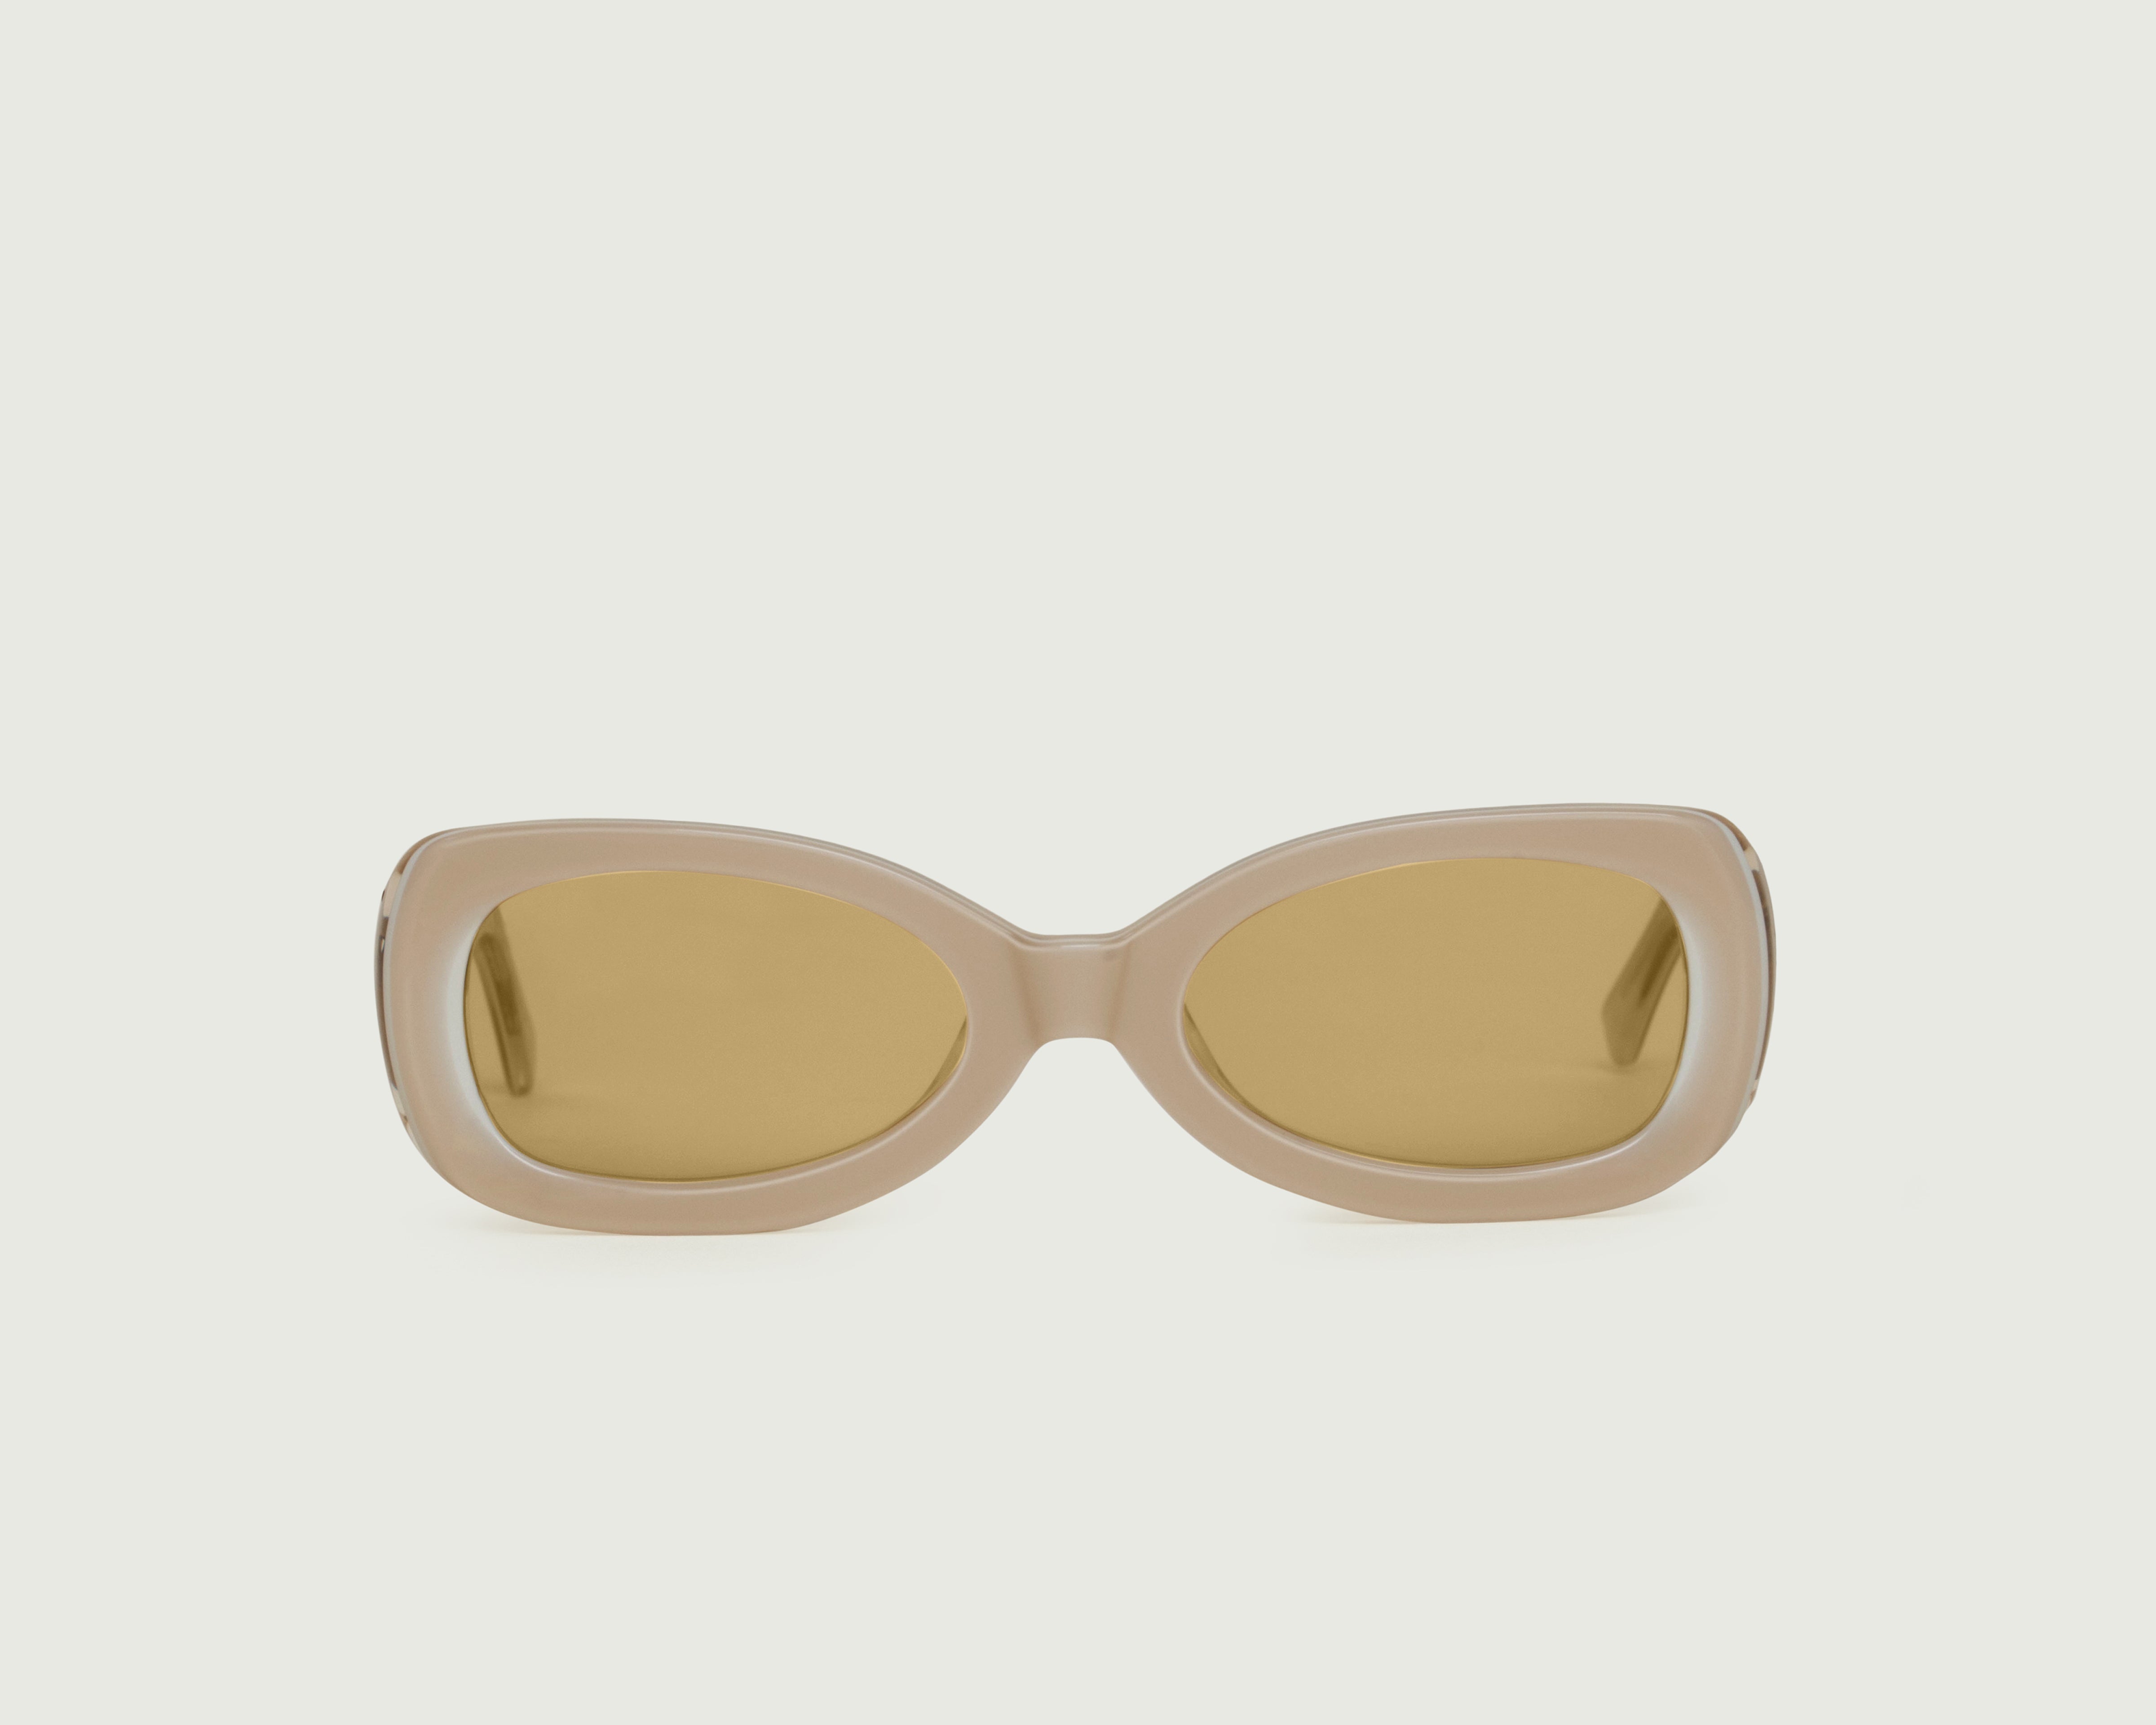 Cashmere::Reese Sunglasses rectangle white acetate front